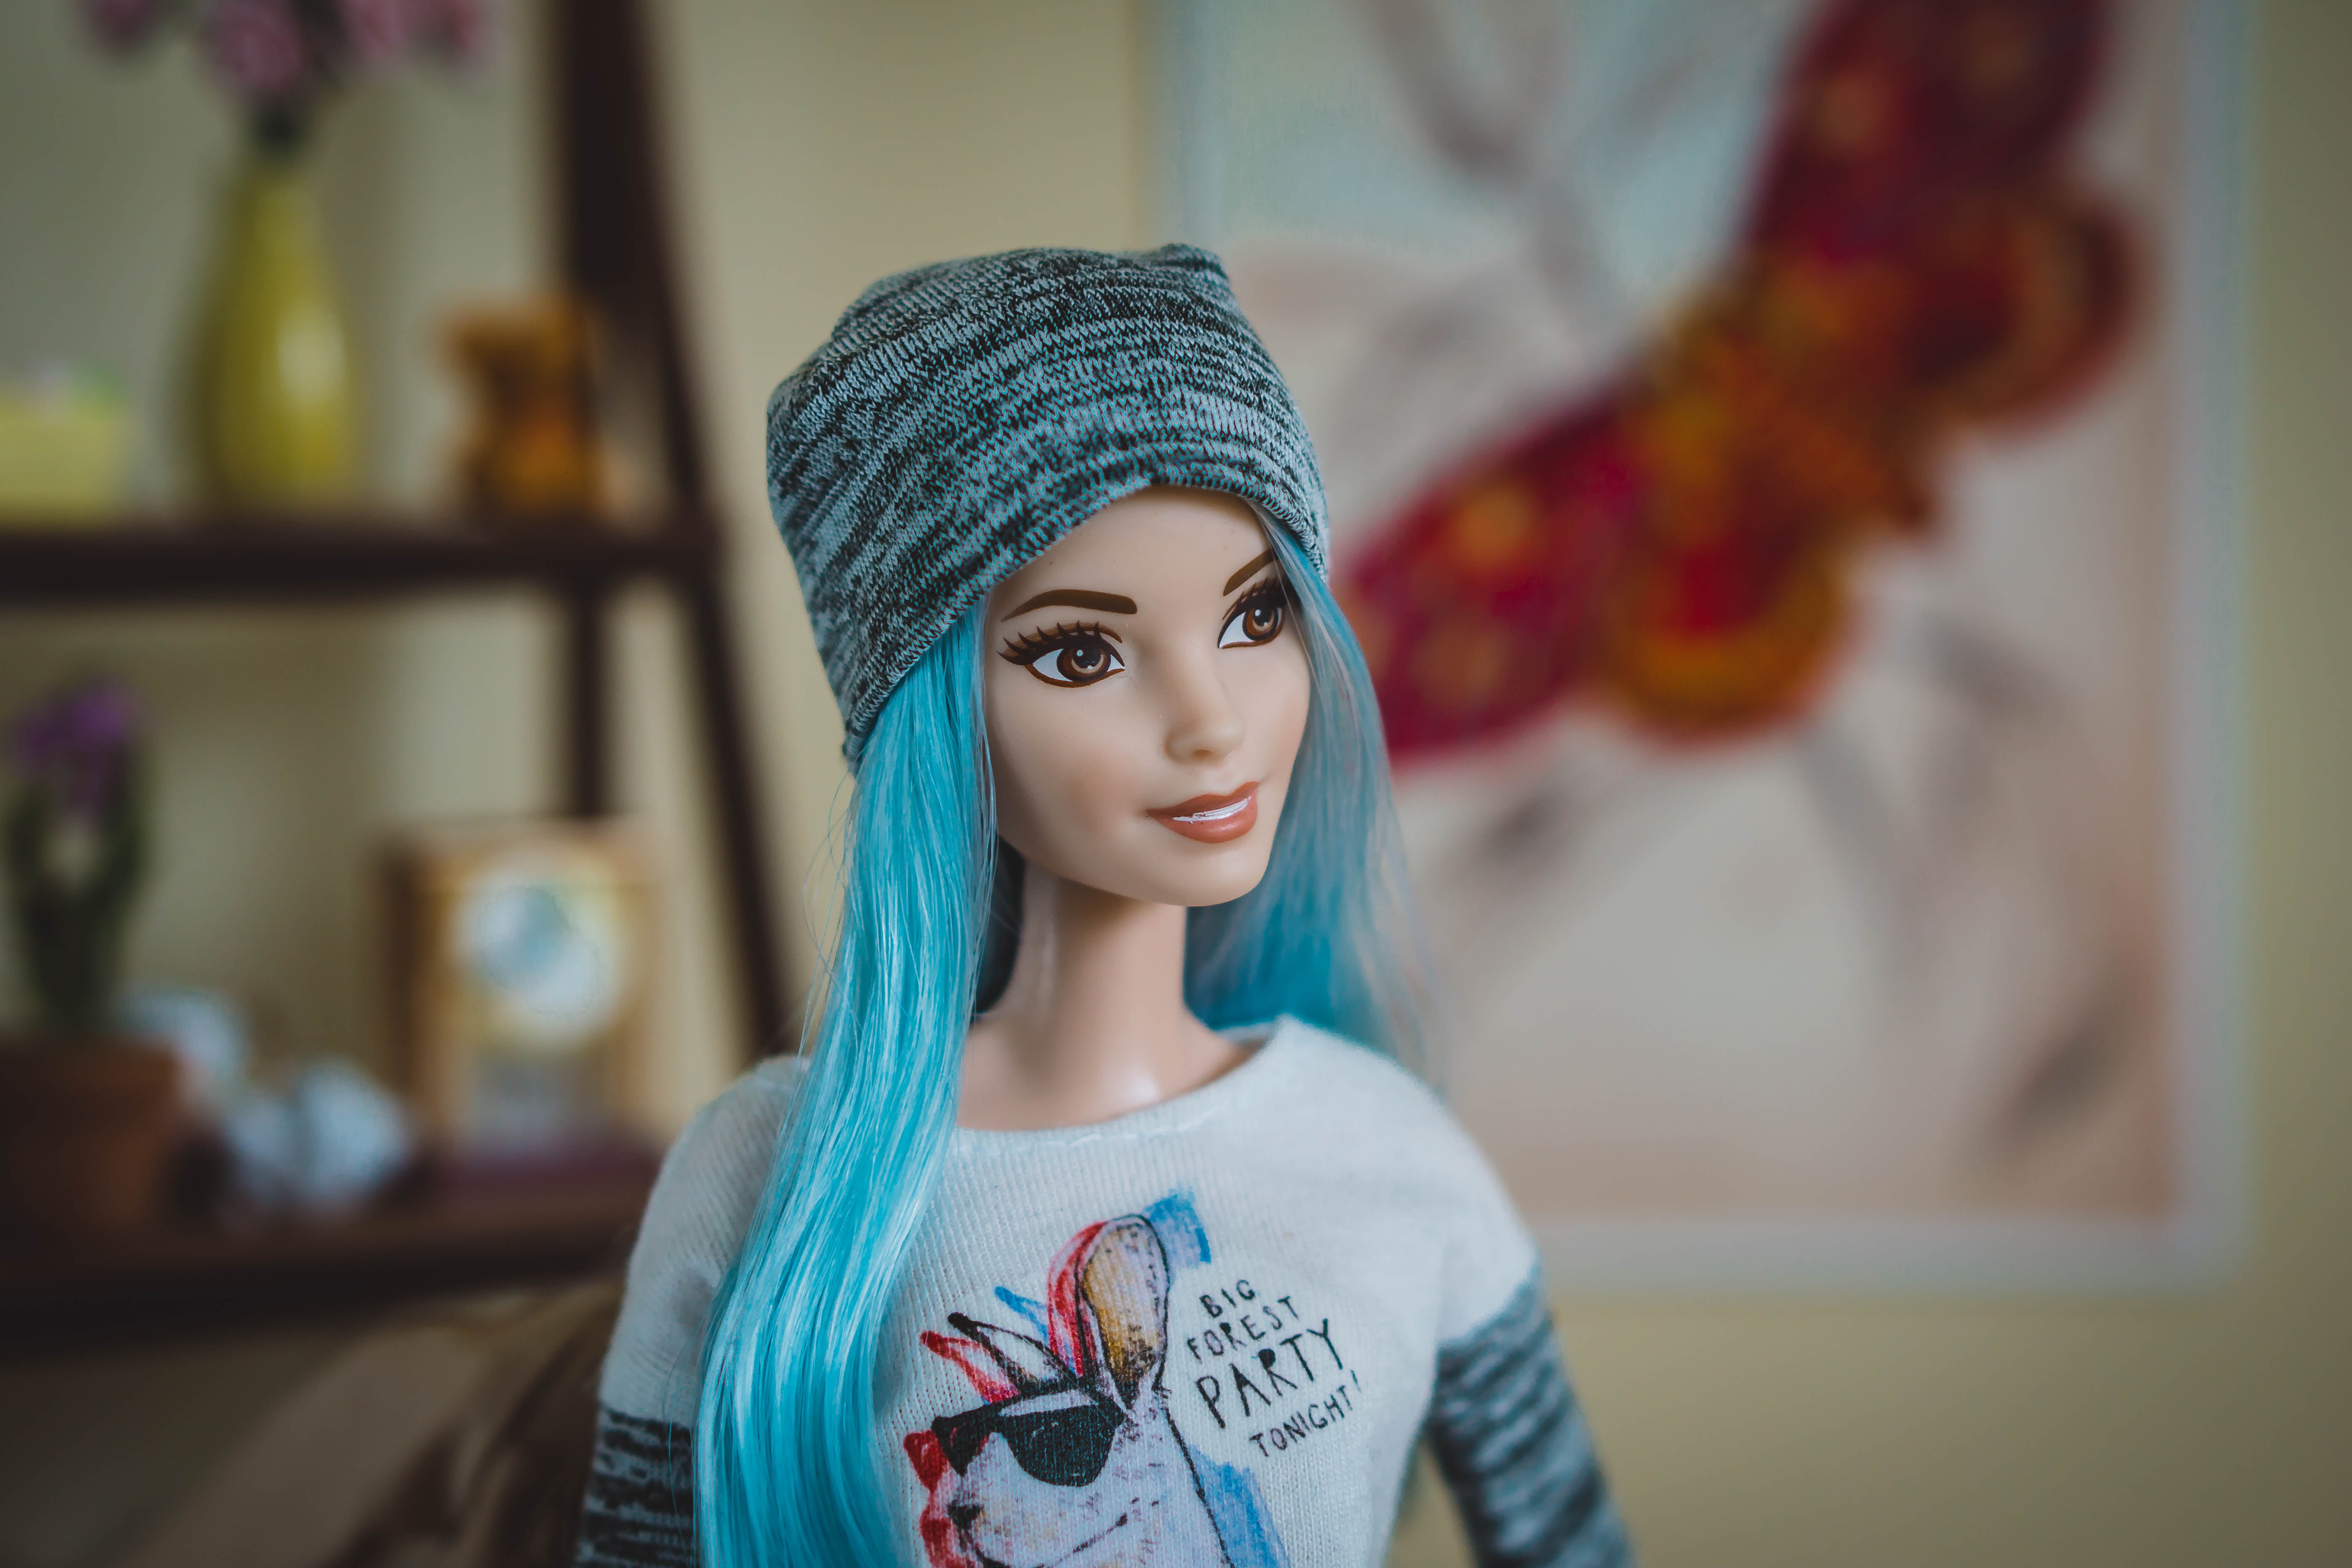 doll, barbie, style, fashion, hat, blue hair, focus on foreground